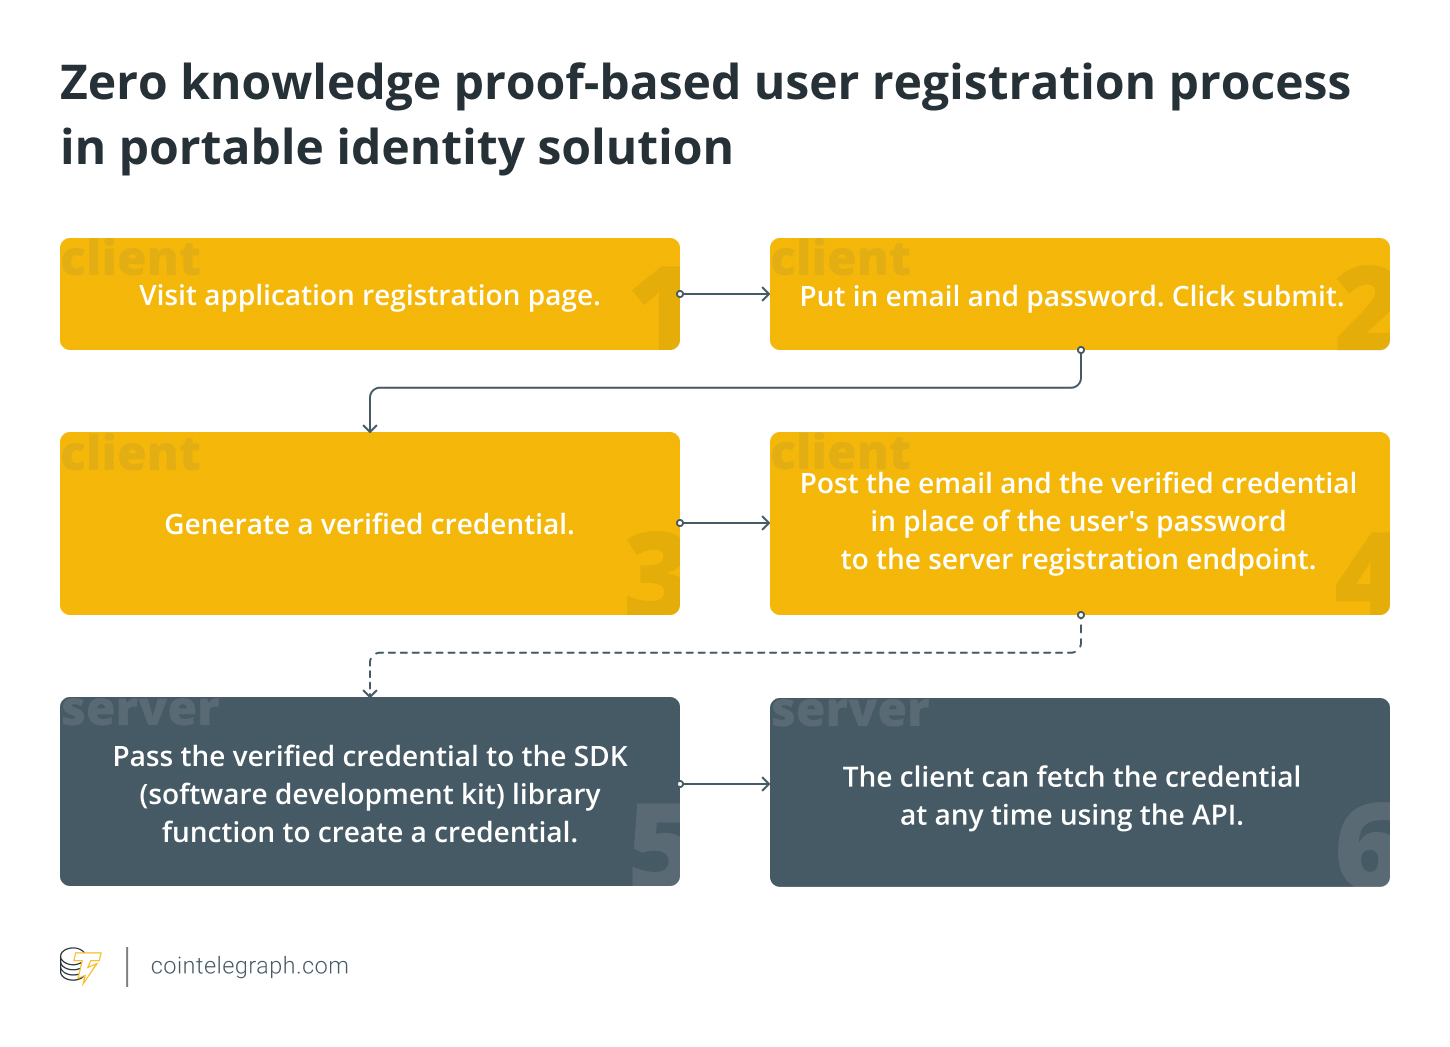 Zero knowledge proof-based user registration process in portable identity solution